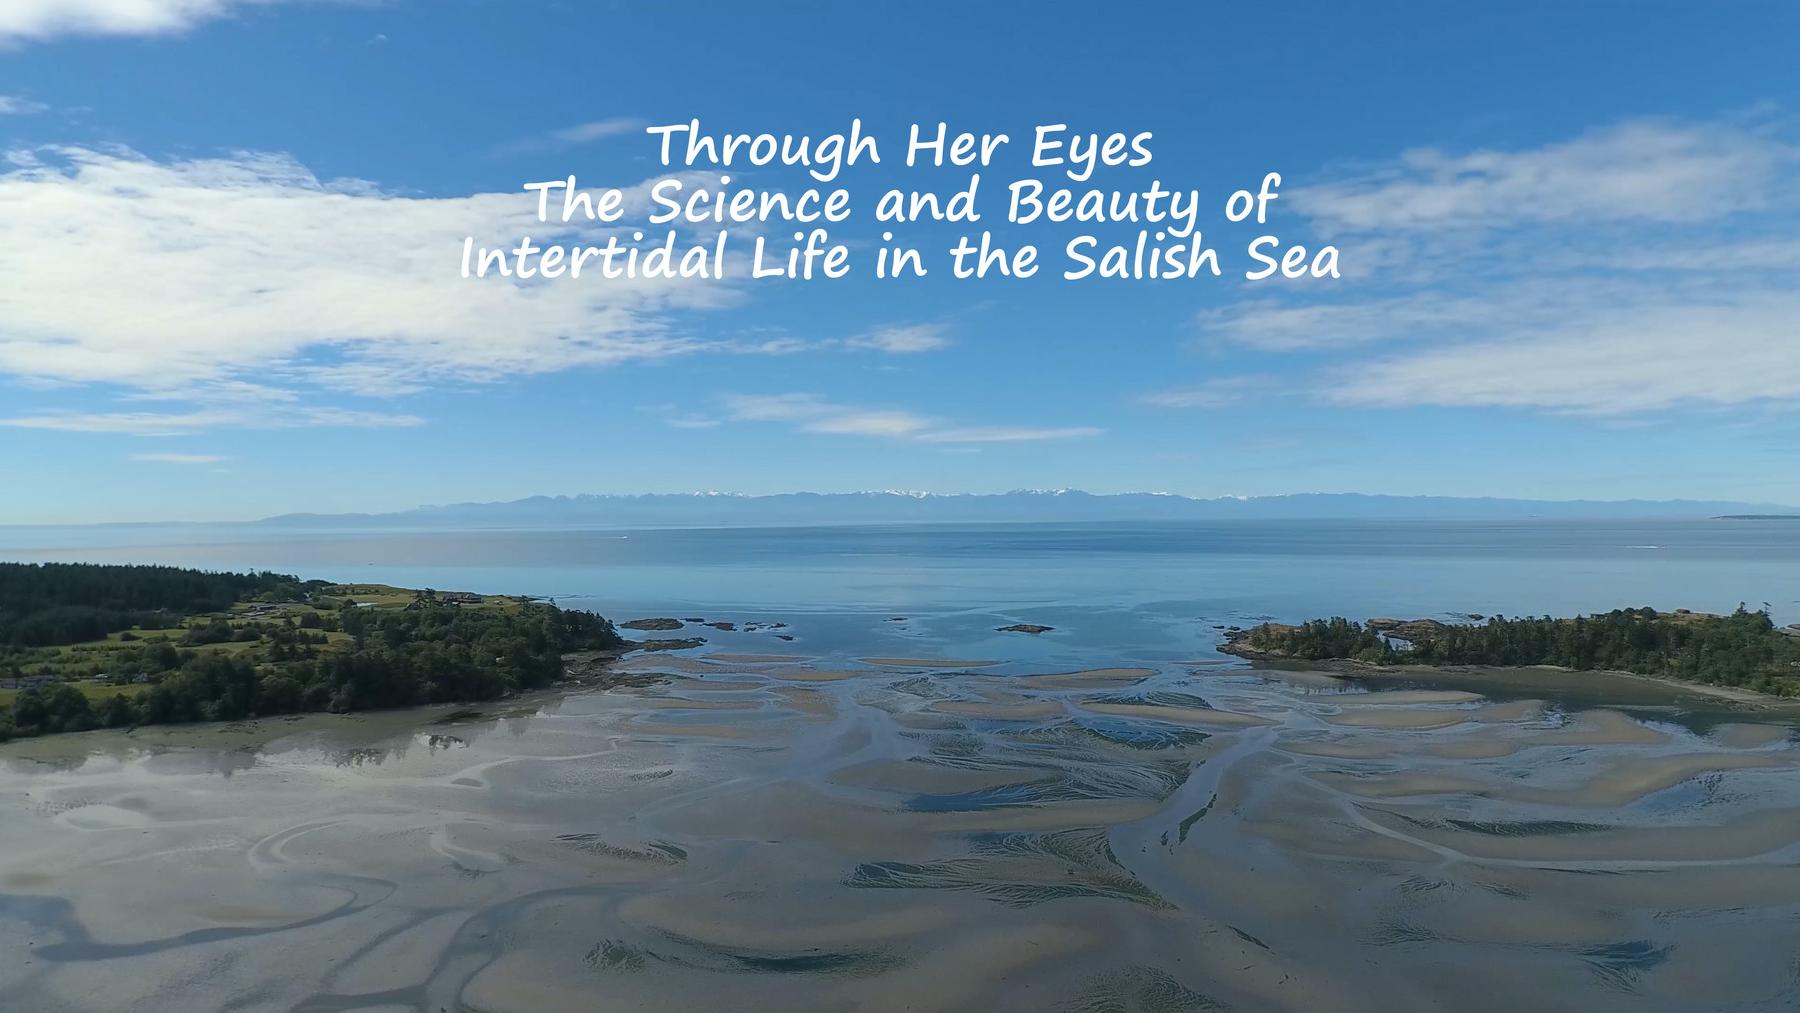 Filmmaker Q&A: THROUGH HER EYES: THE SCIENCE AND BEAUTY OF INTERTIDAL LIFE IN THE SALISH SEA